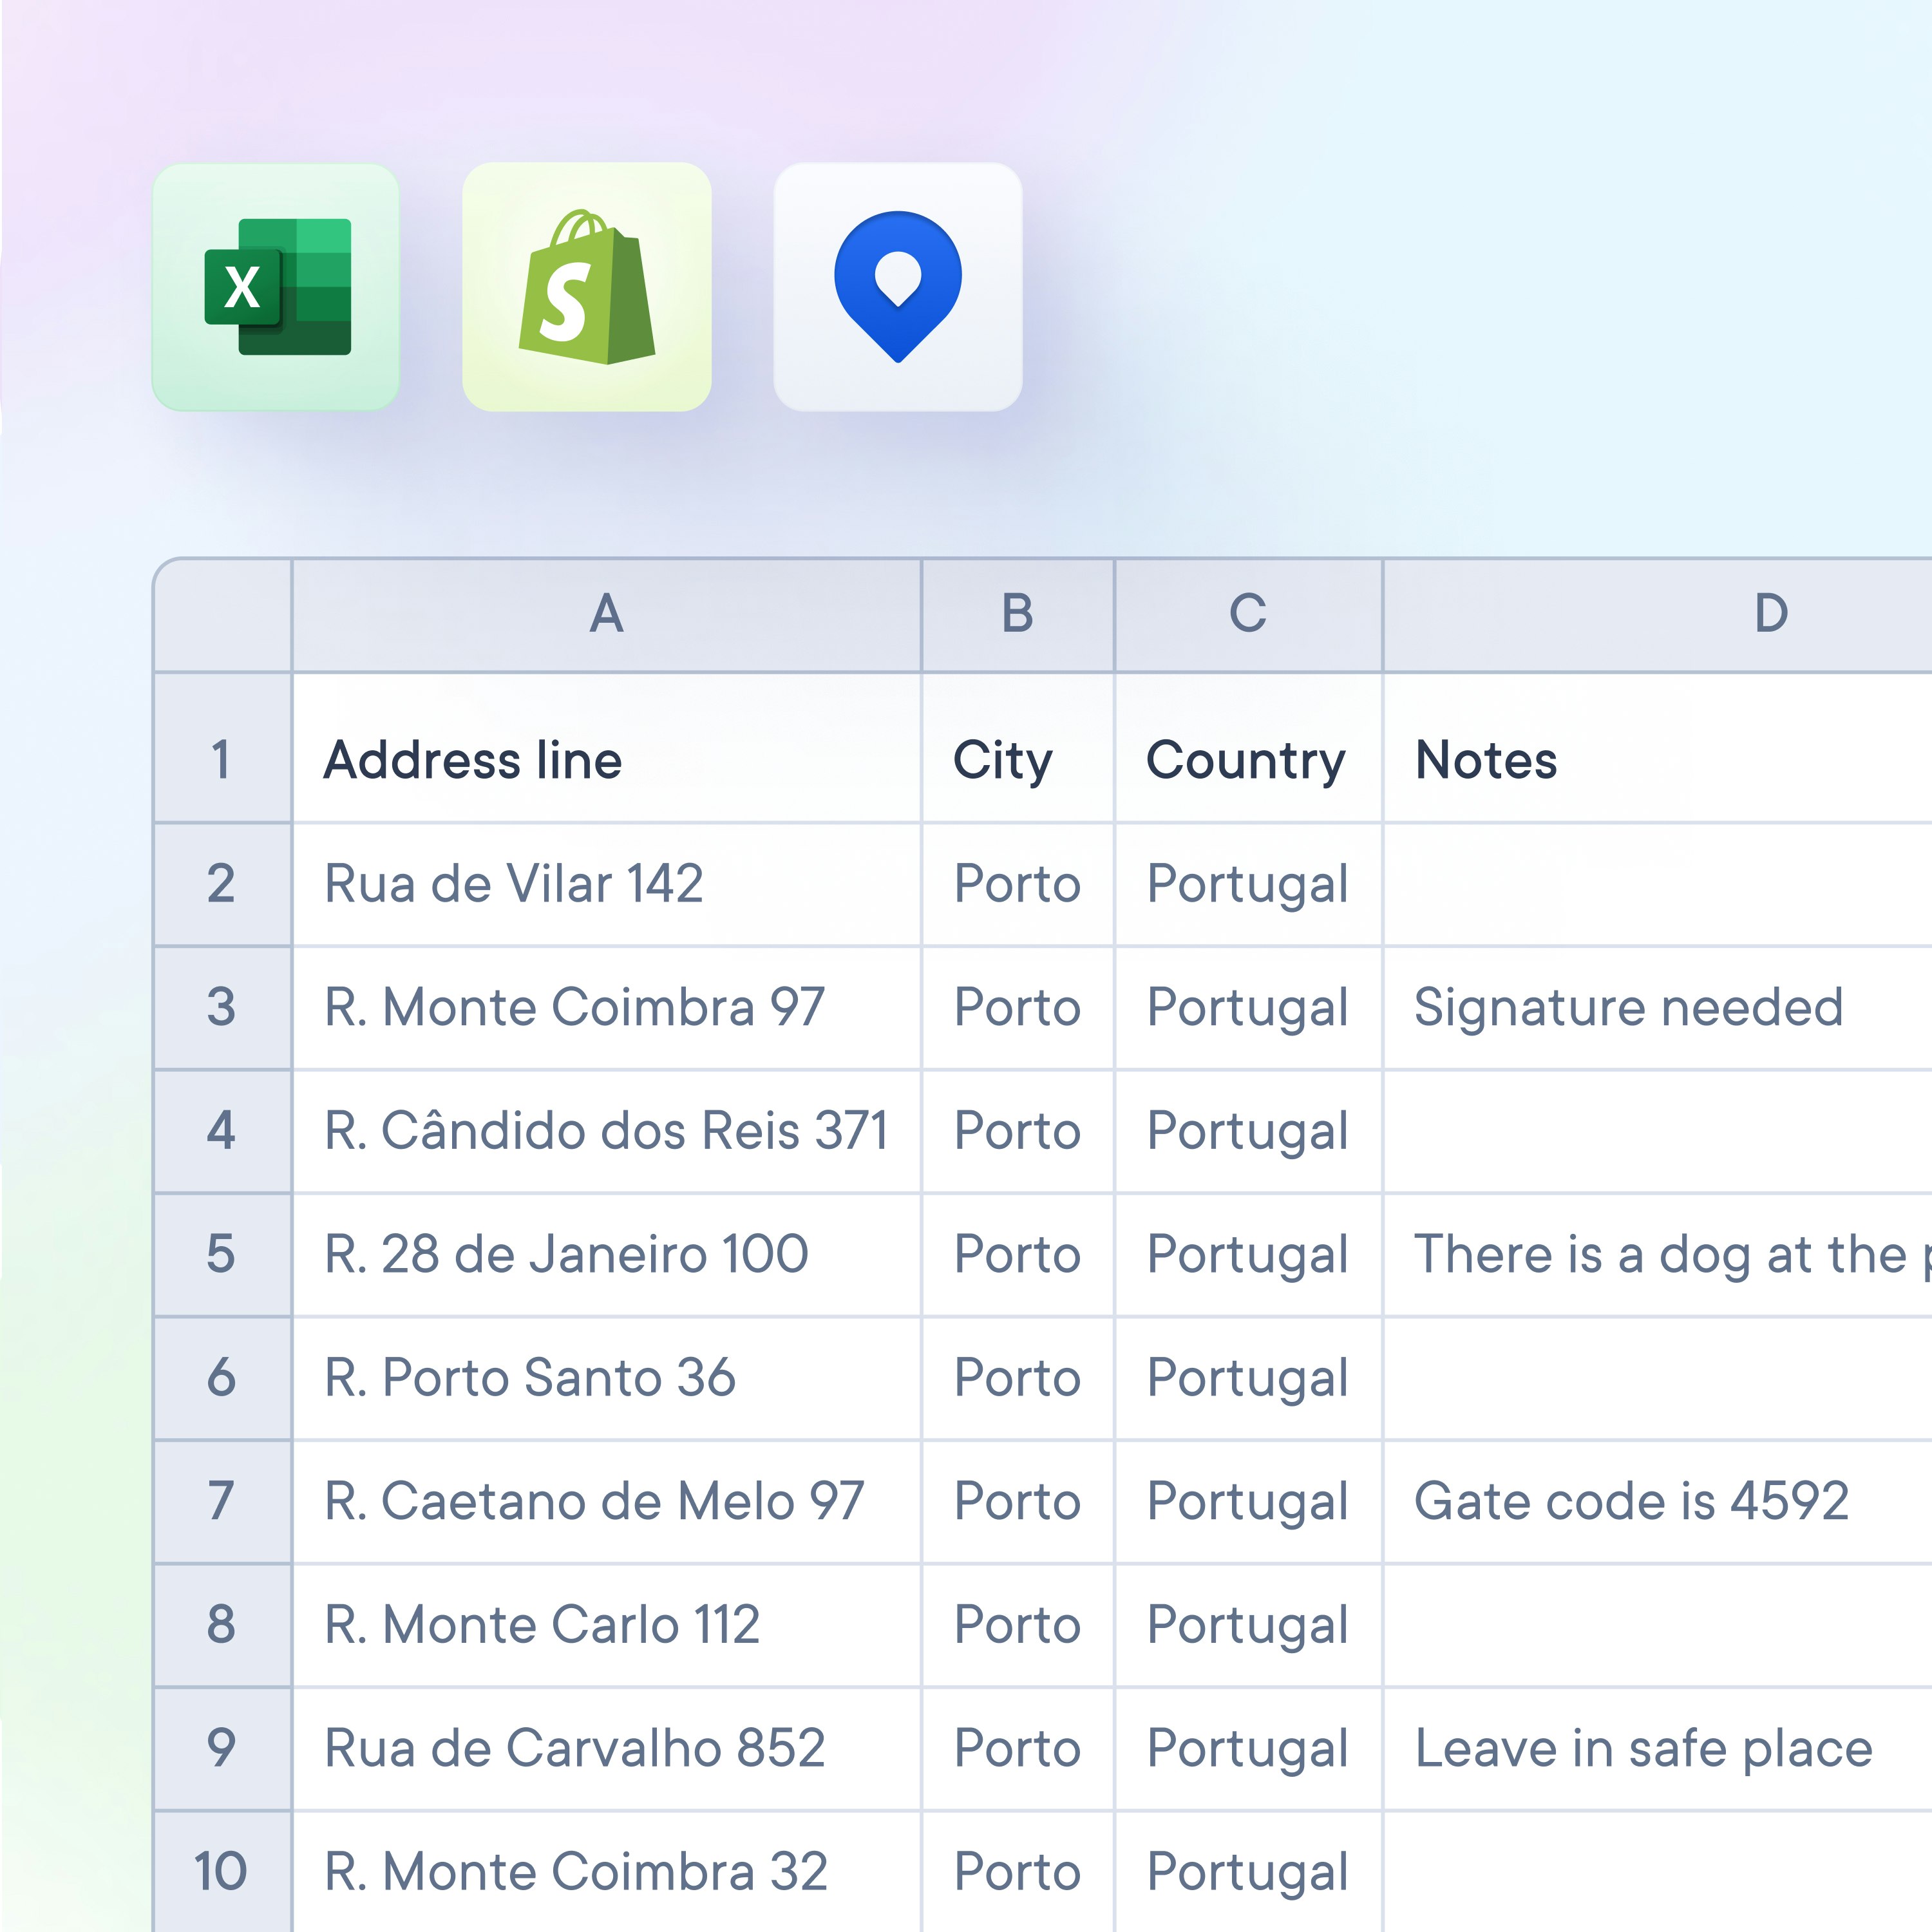 Spreadsheet view of a delivery route with address, city, country, and special notes for a route in Porto, Portugal